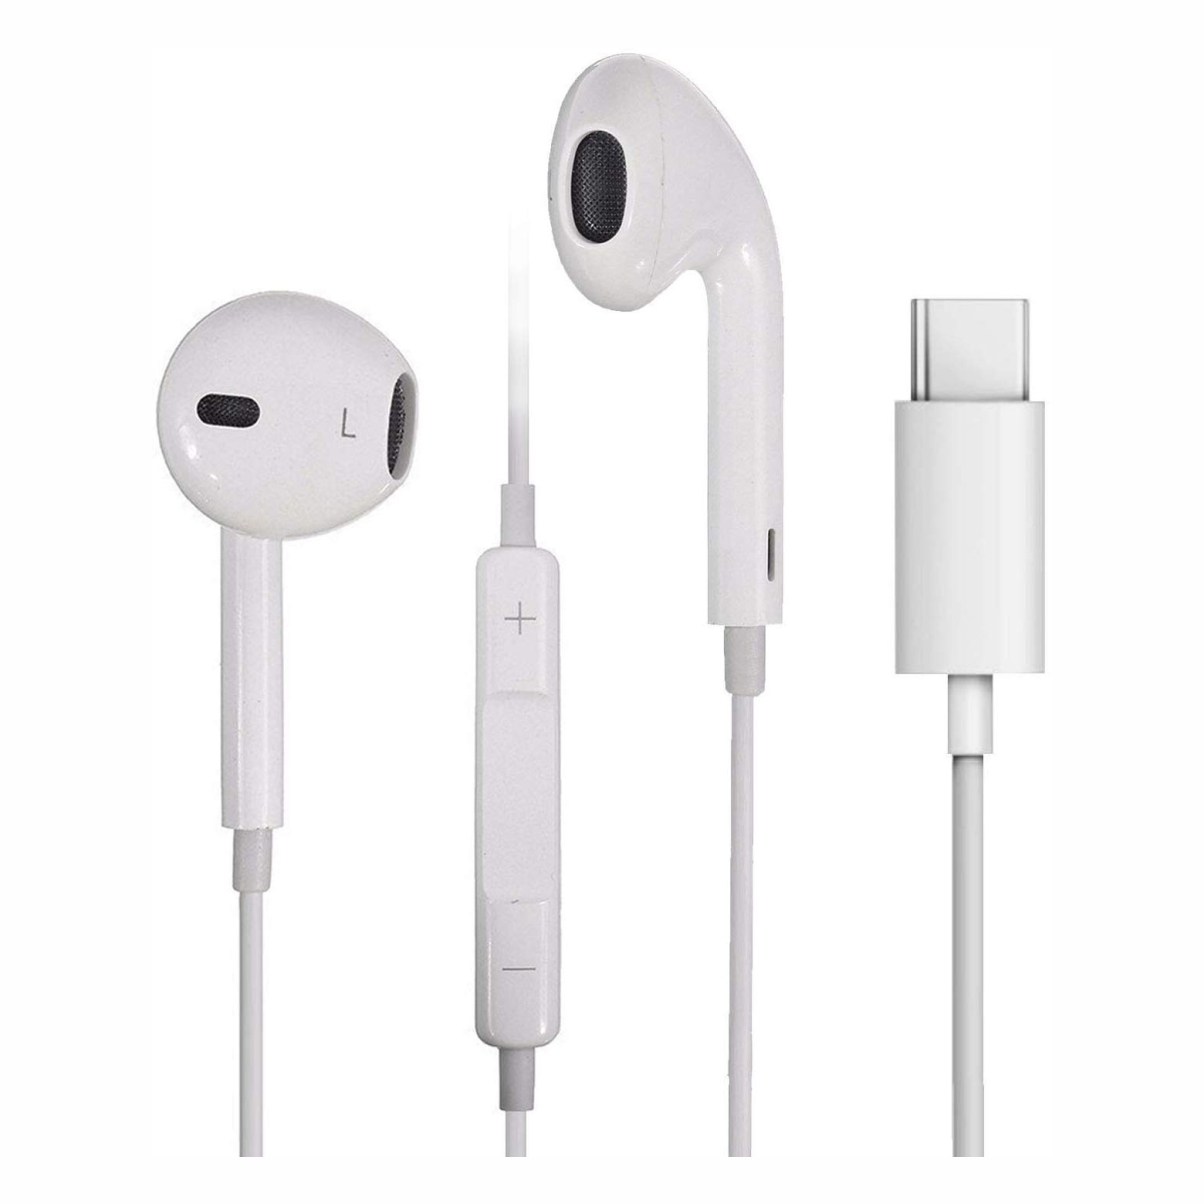 Type-C Wired Earphones HiFi Stereo Headset in-Ear Attractive Designs Headphones with Microphone & Noise Reduction Compatible with Samsang Google Pixel Redmi Oppo One Plus Laptops Only Type-C Devices